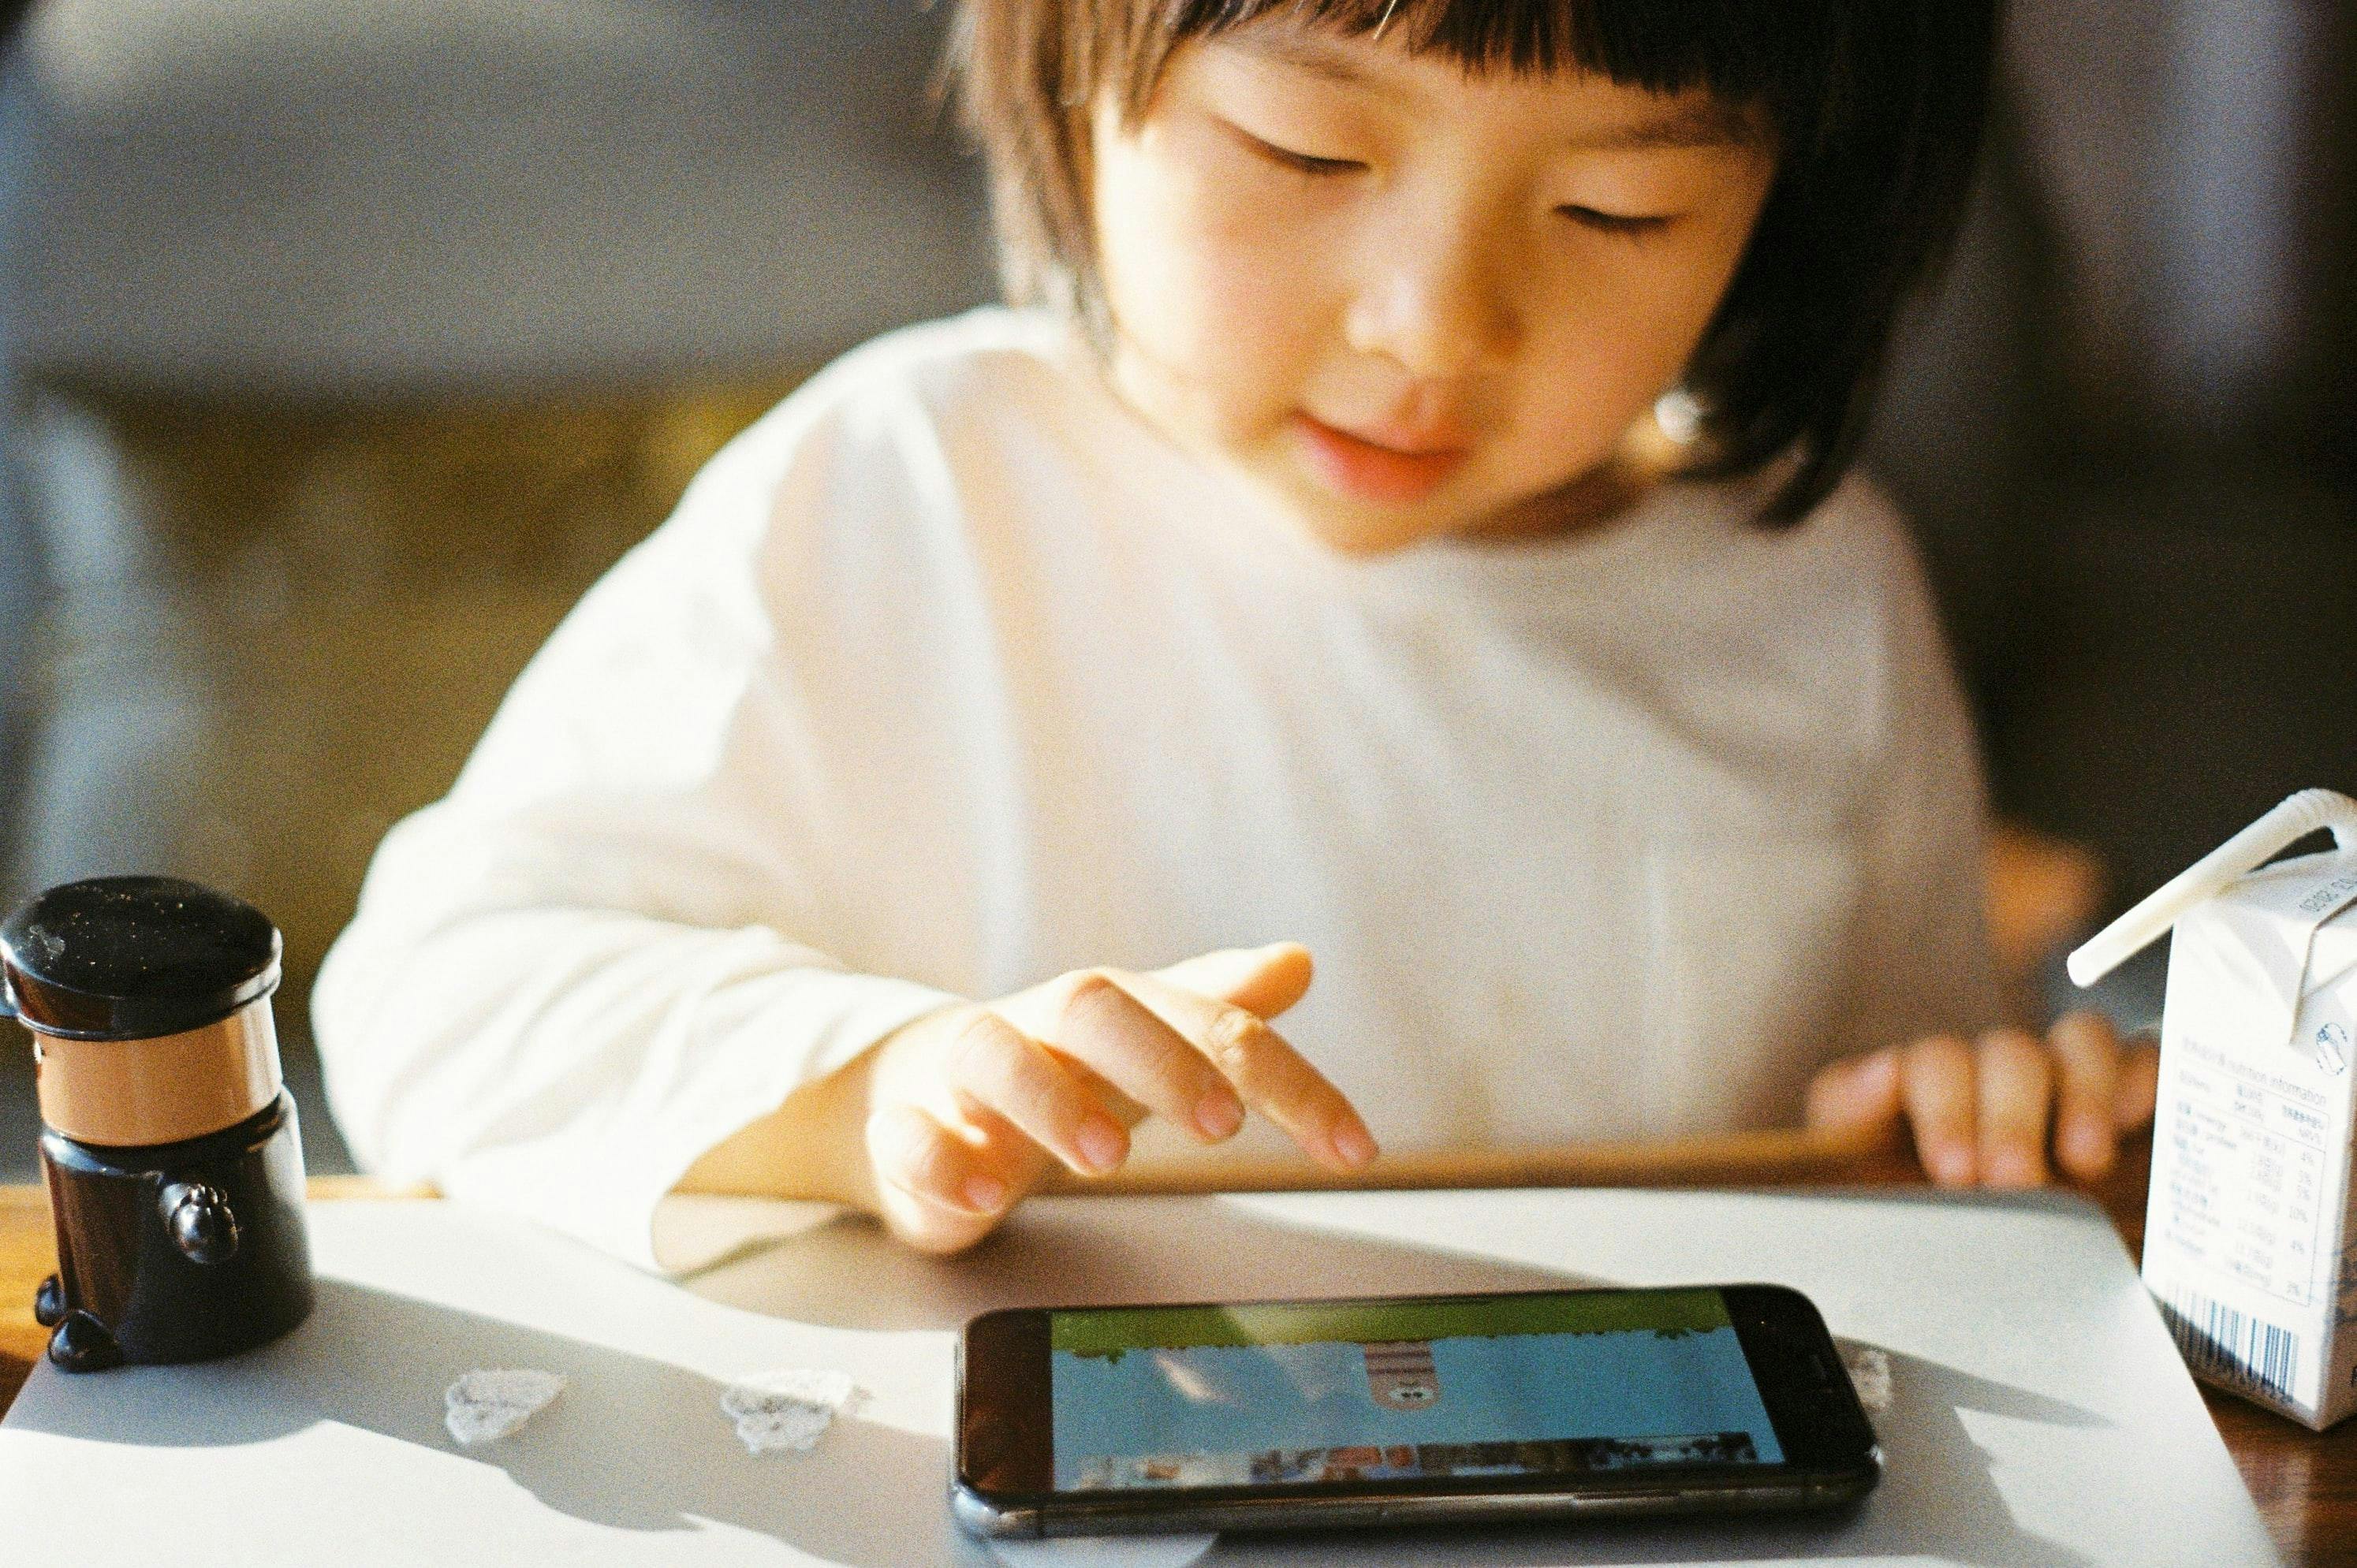 Young girl playing games on a smart phone.